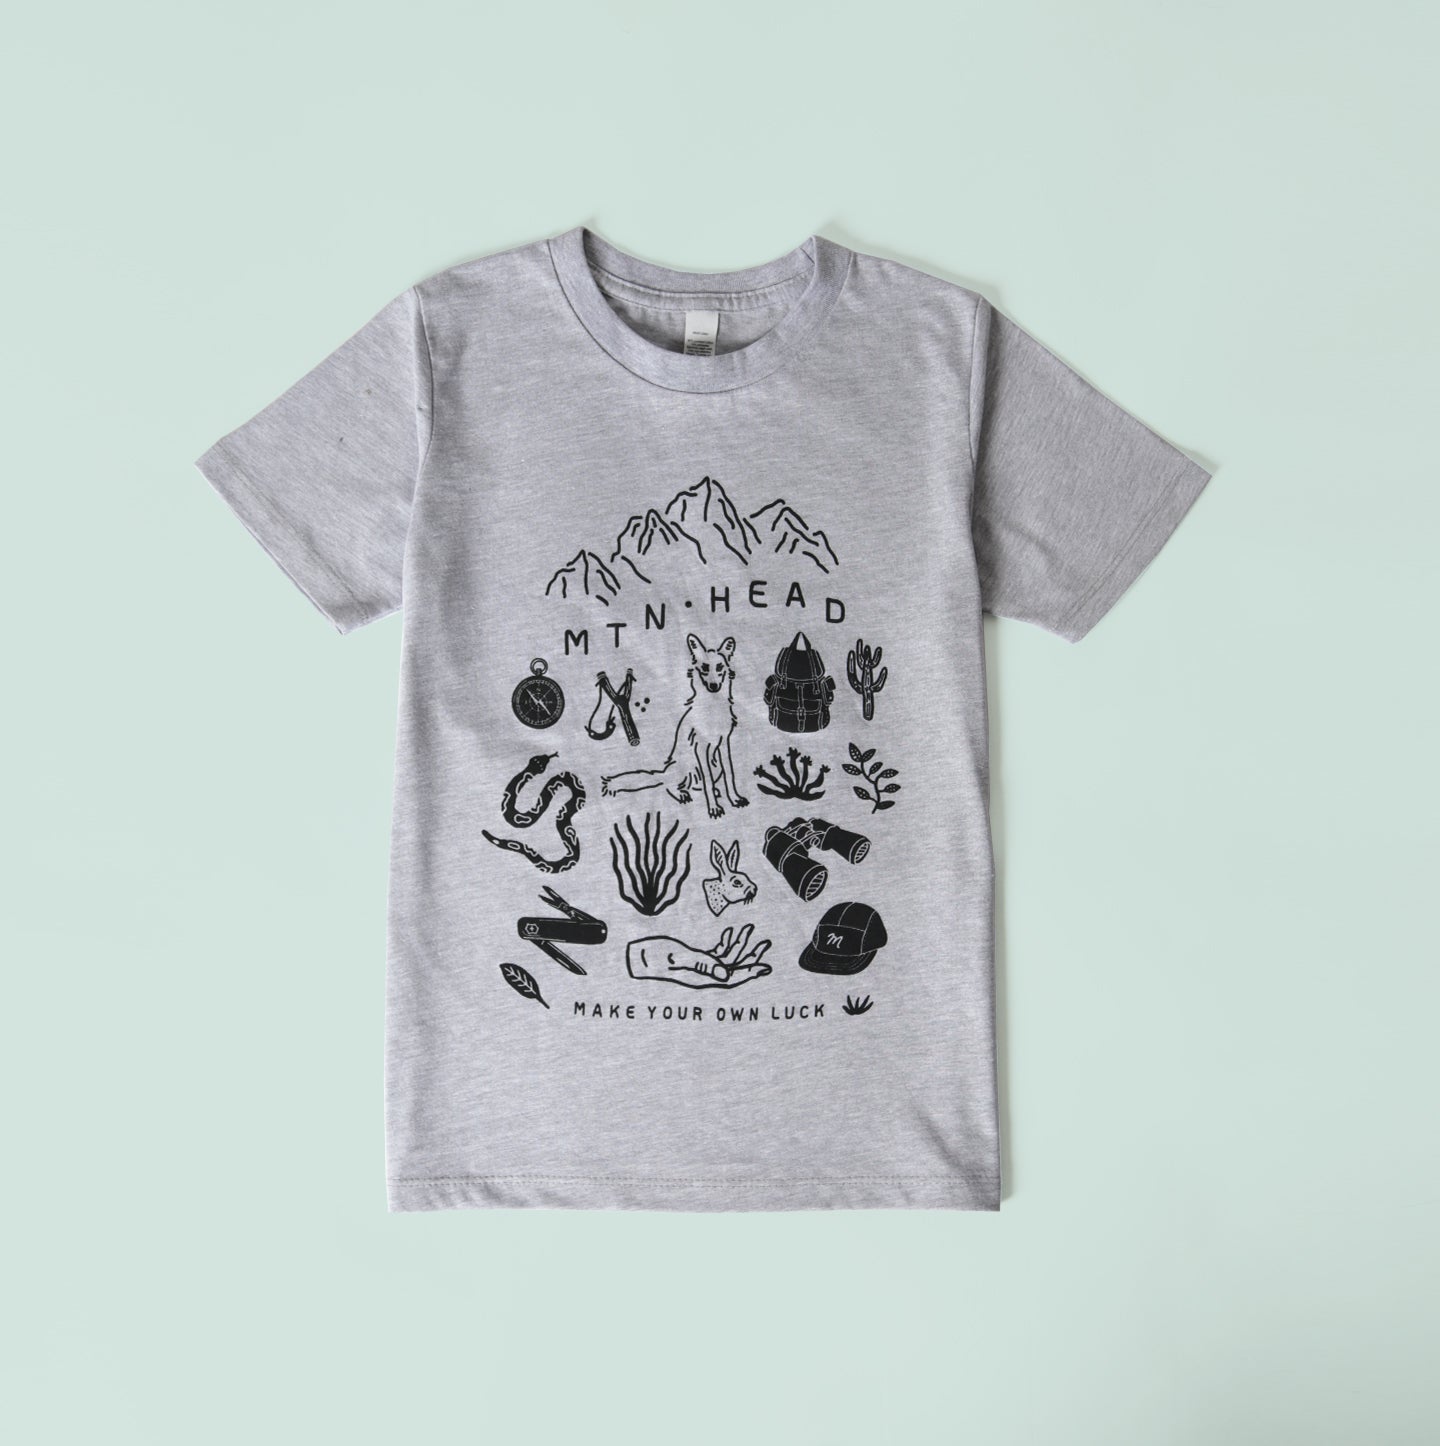 Kids Tee - Grey - Make Your Own Luck